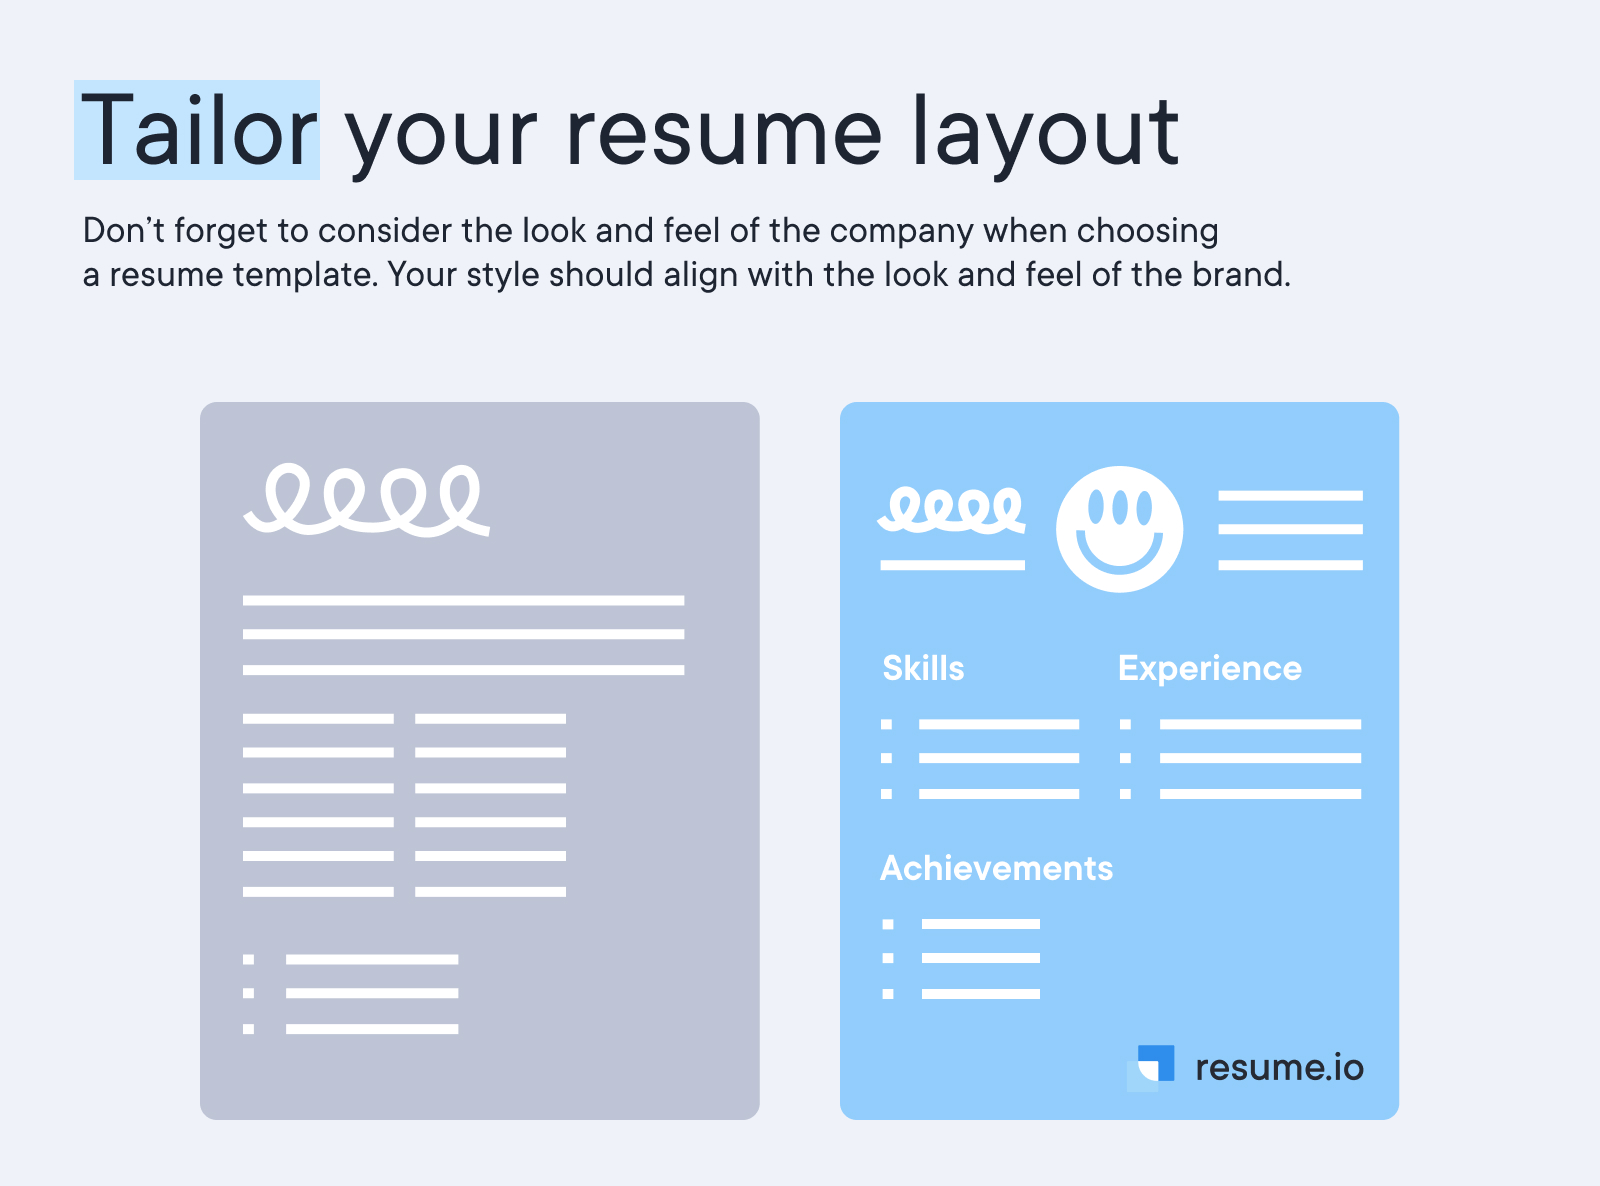 Tailor you resume layout